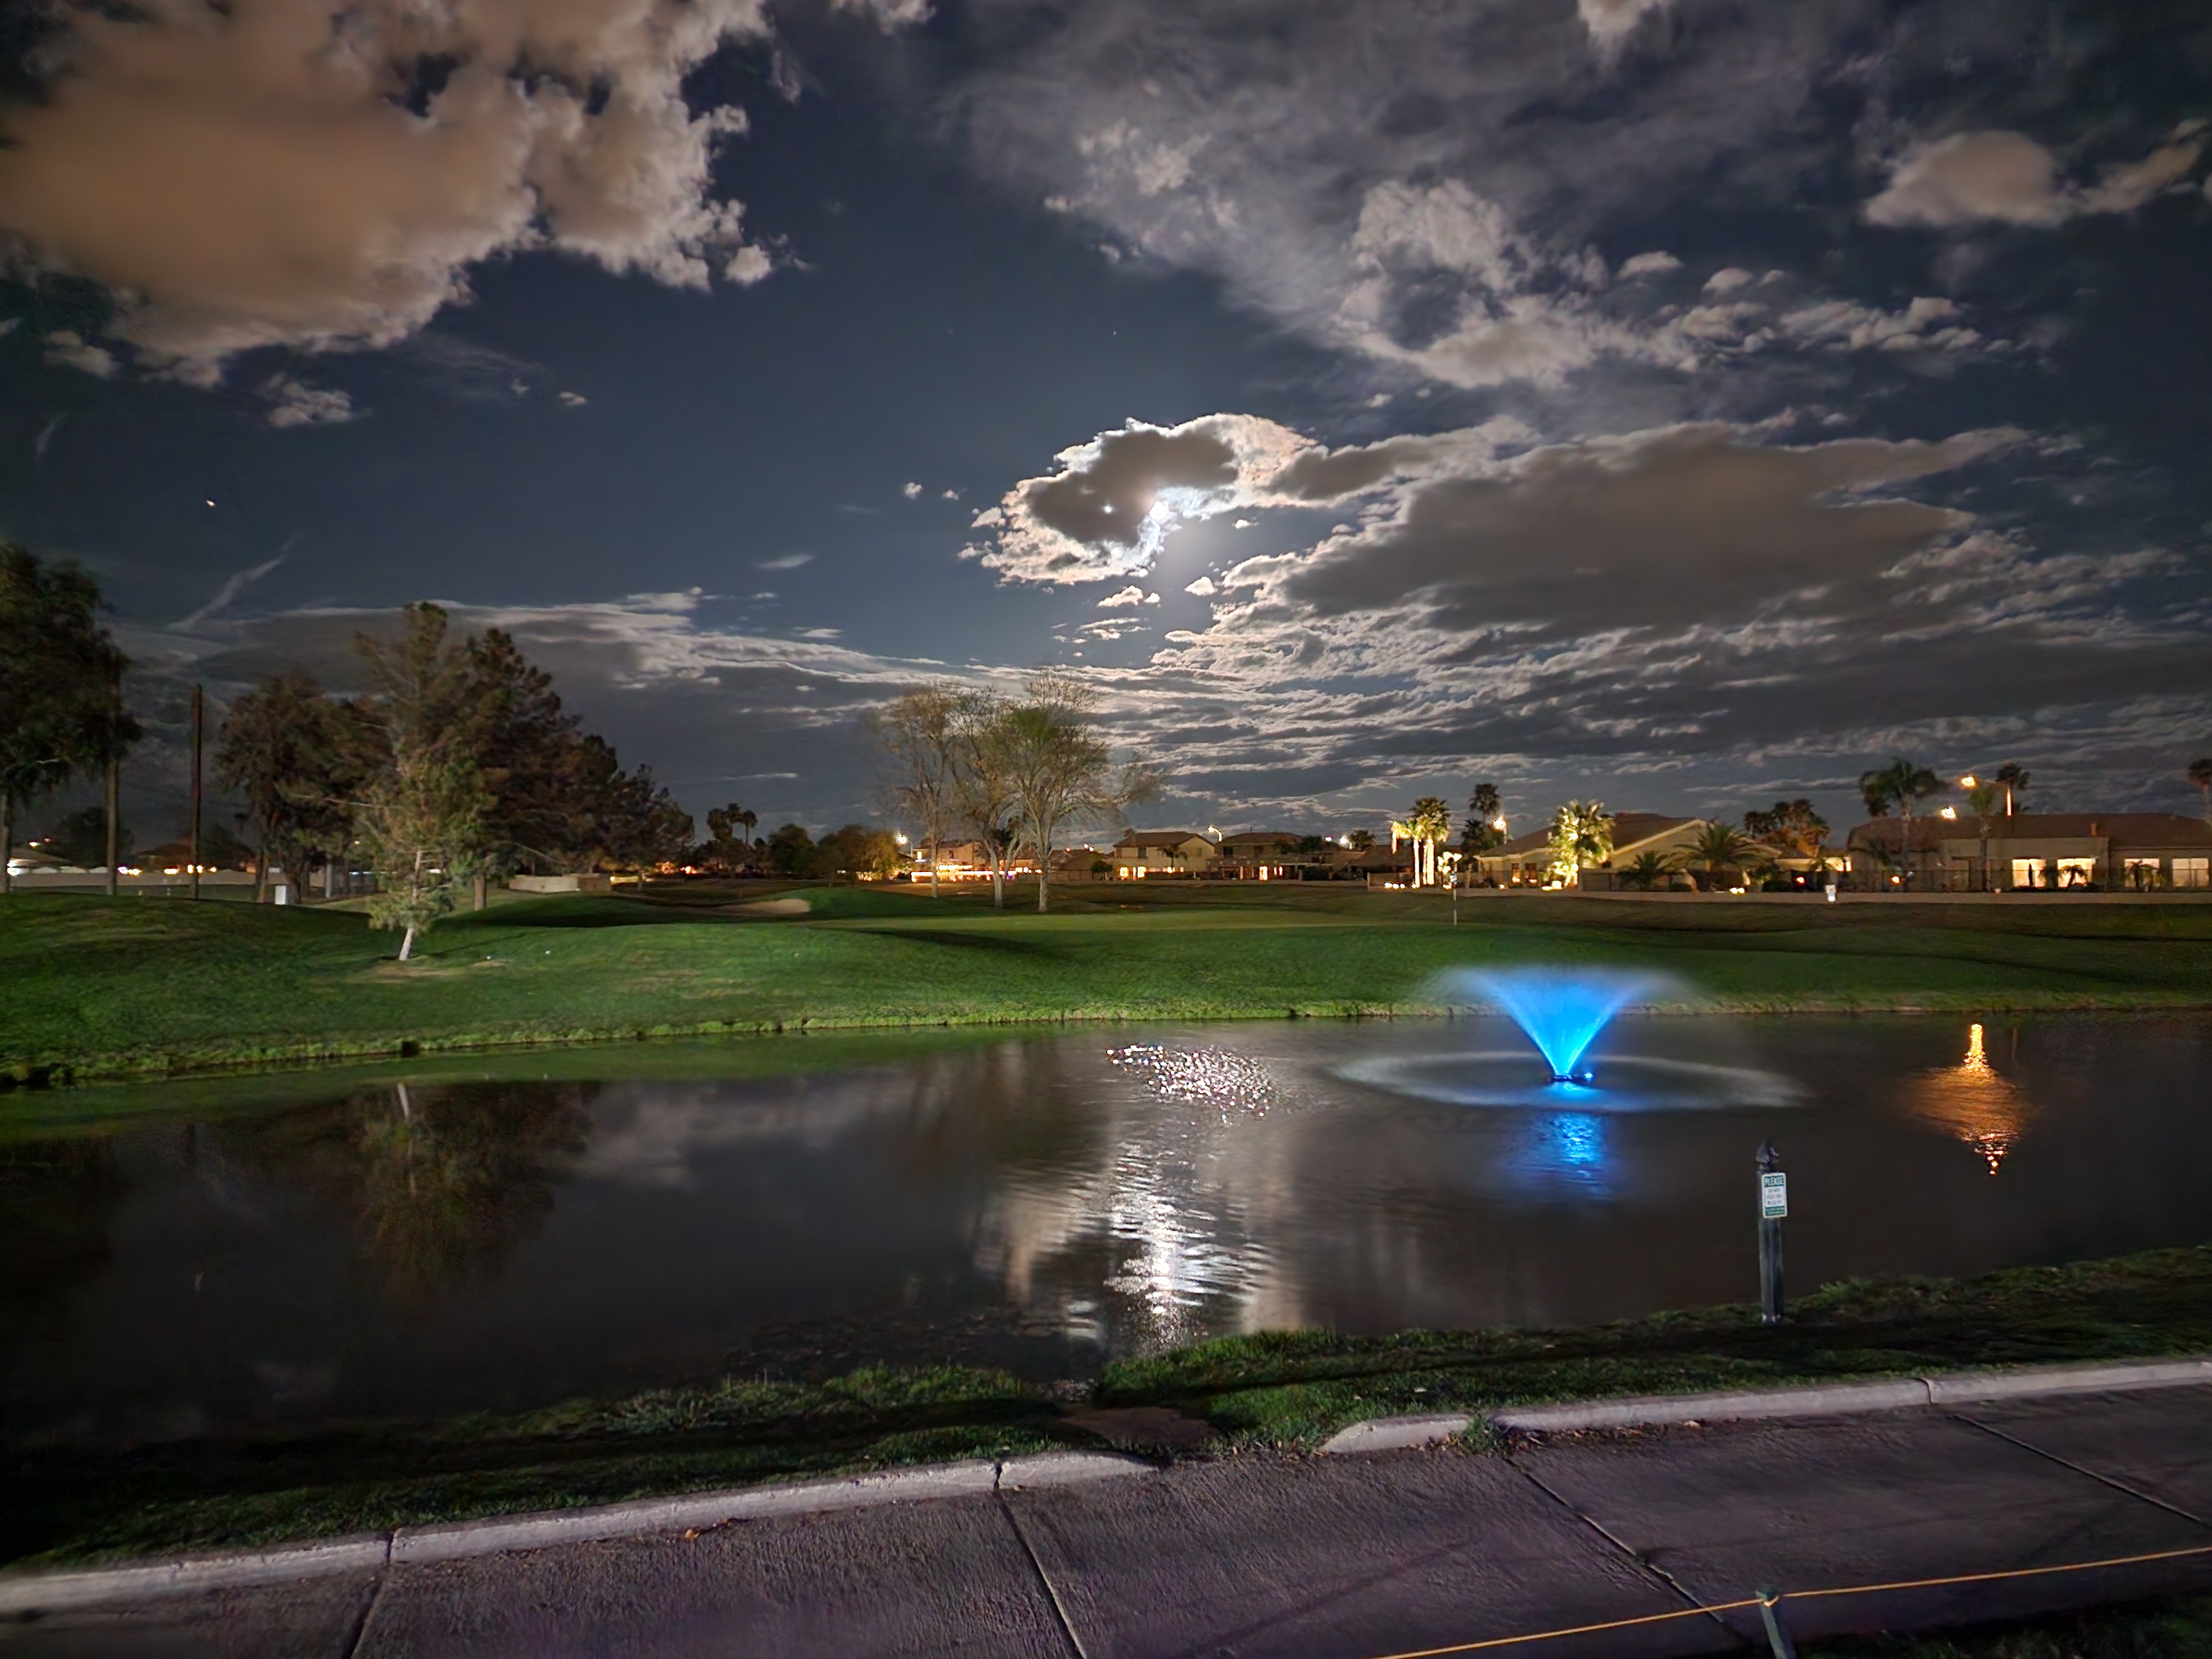 If You Are Searching For “Night Golf Near Me” You Have Found It!